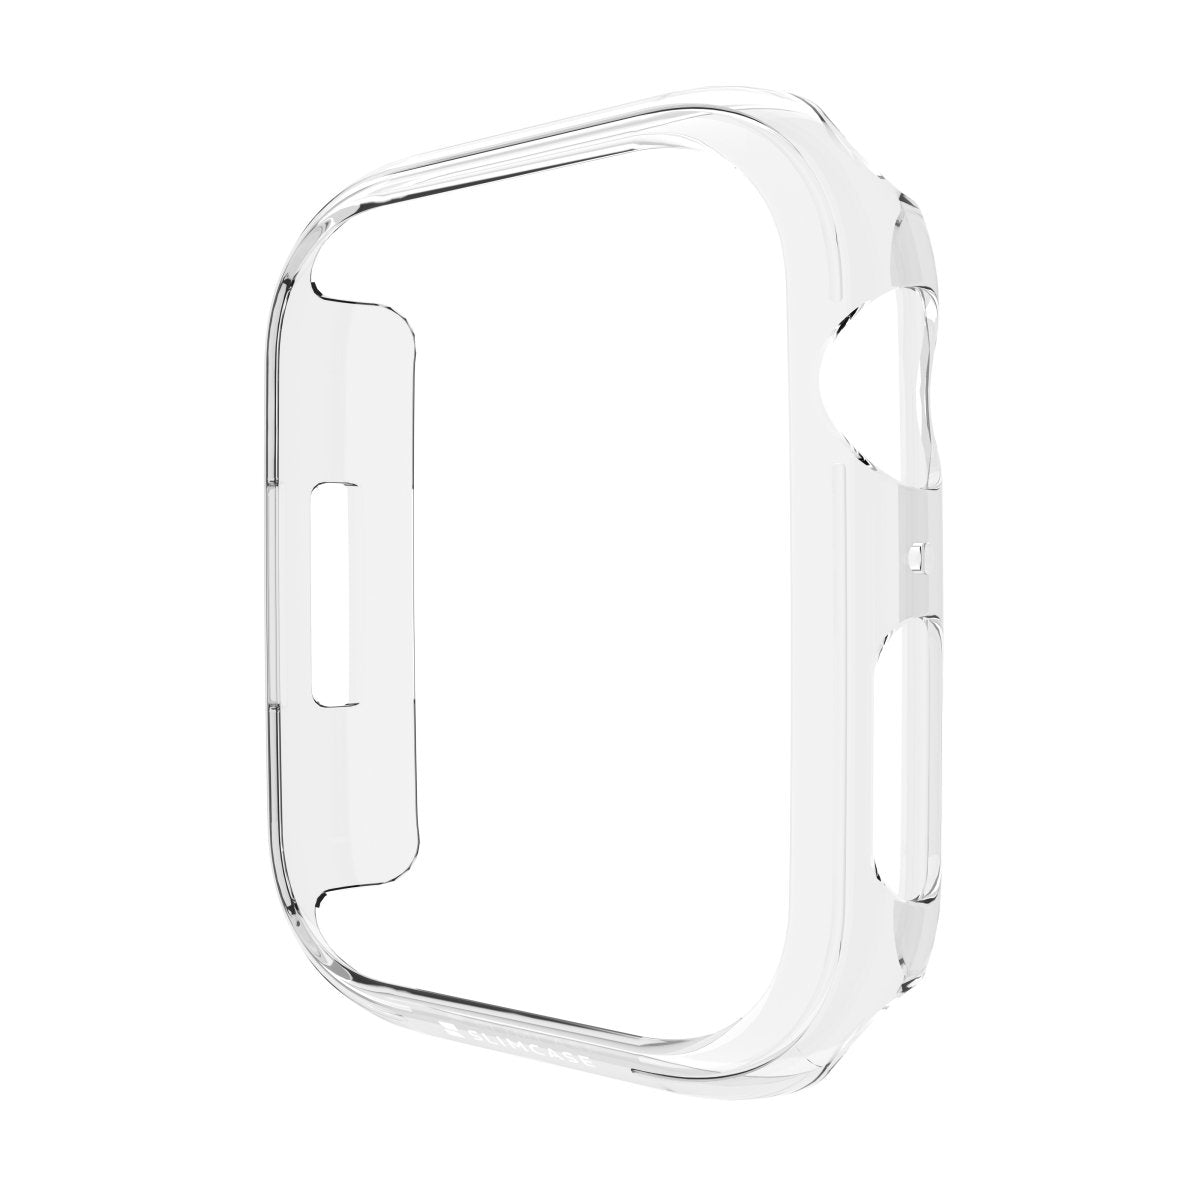 Slimcase for Apple Watch Series 7 / 8 - Slimcase IndiaCase